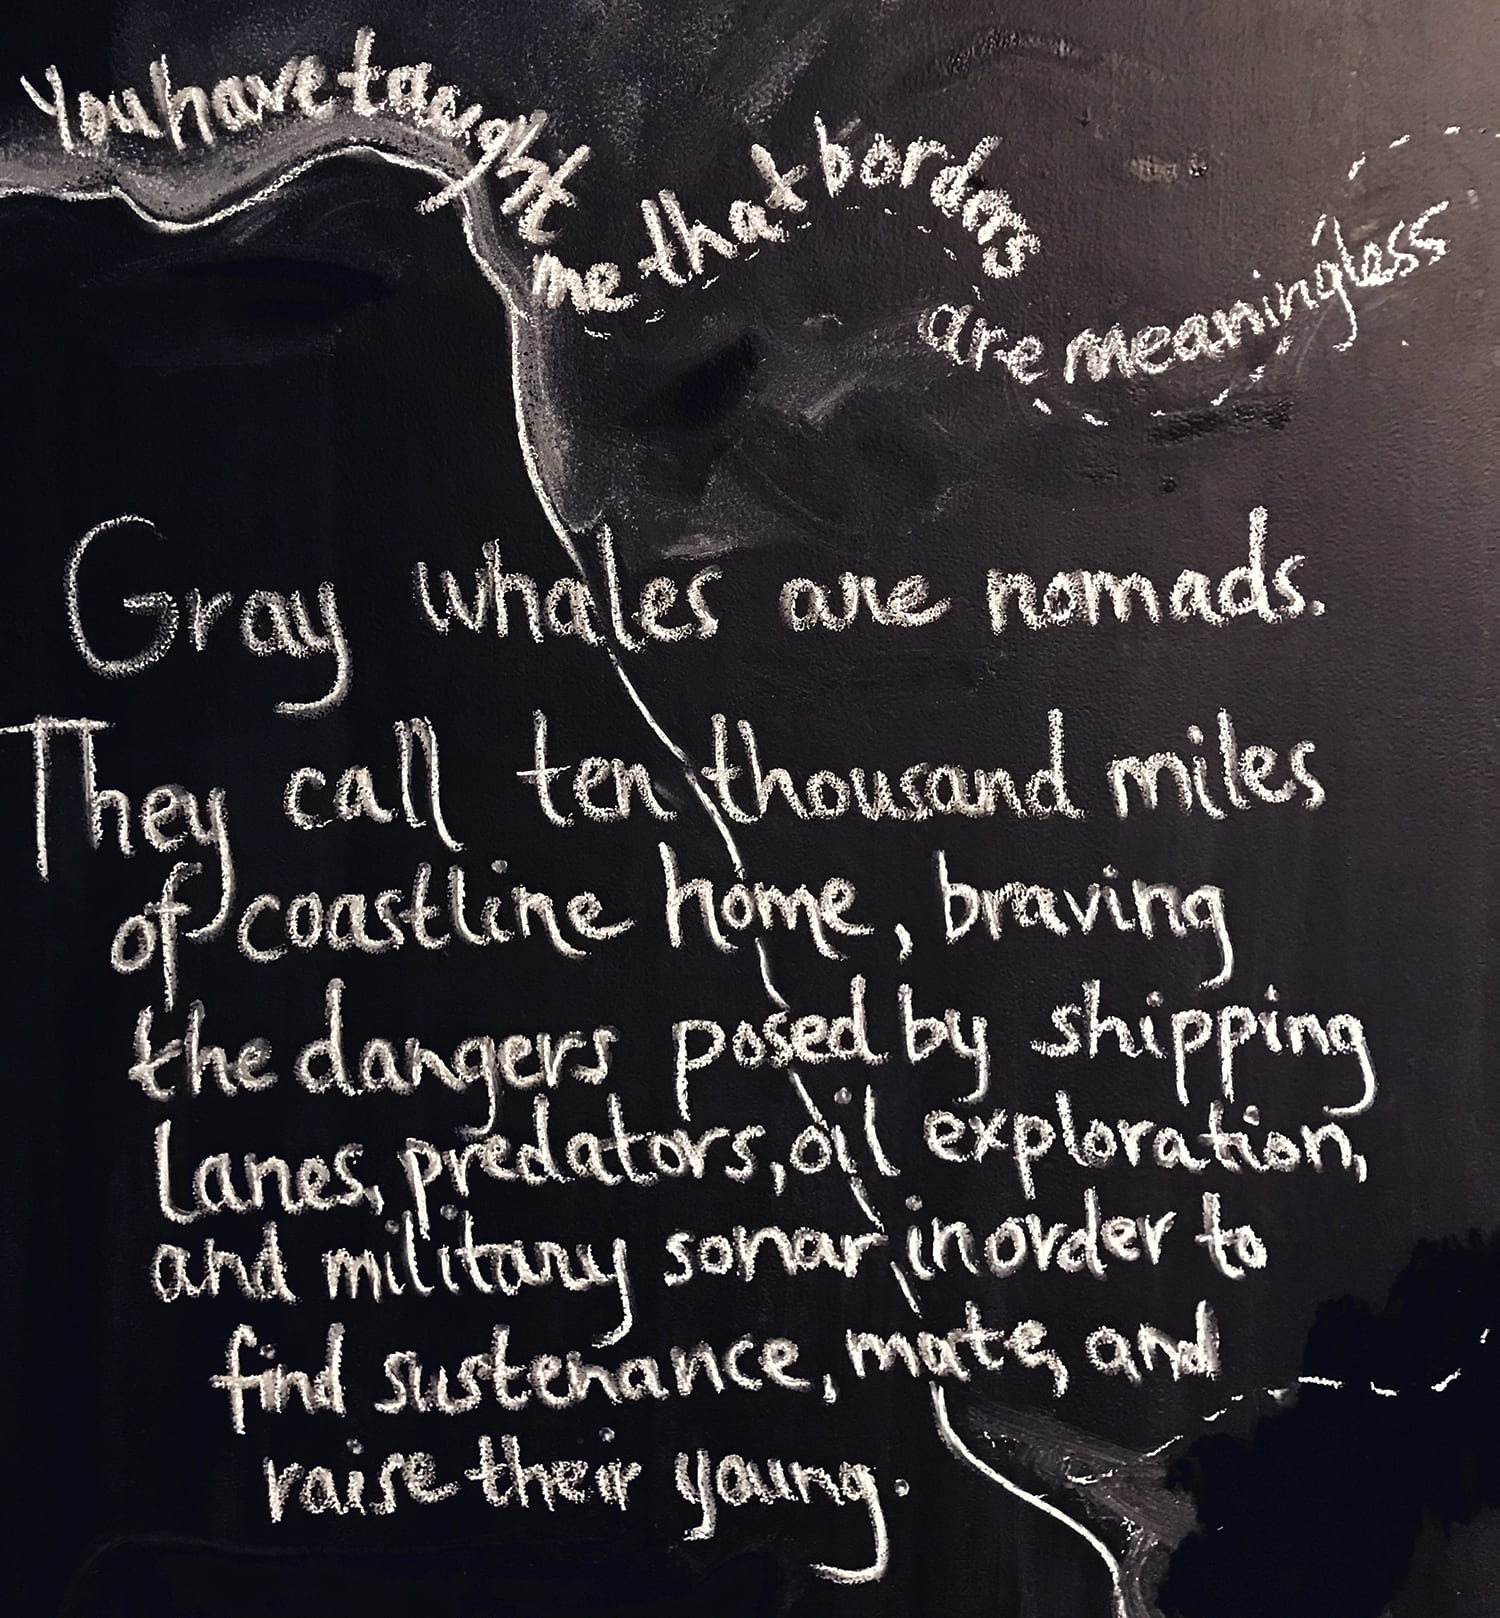 handwritten words on a chalkboard: You have taught me that borders are meaningless. Gray whales are nomads. They call ten thousand miles of coastline home, braving the dangers posed by shipping lanes, predators, oil exploration, and military sonar in order to find sustenance, mate, and raise their young.